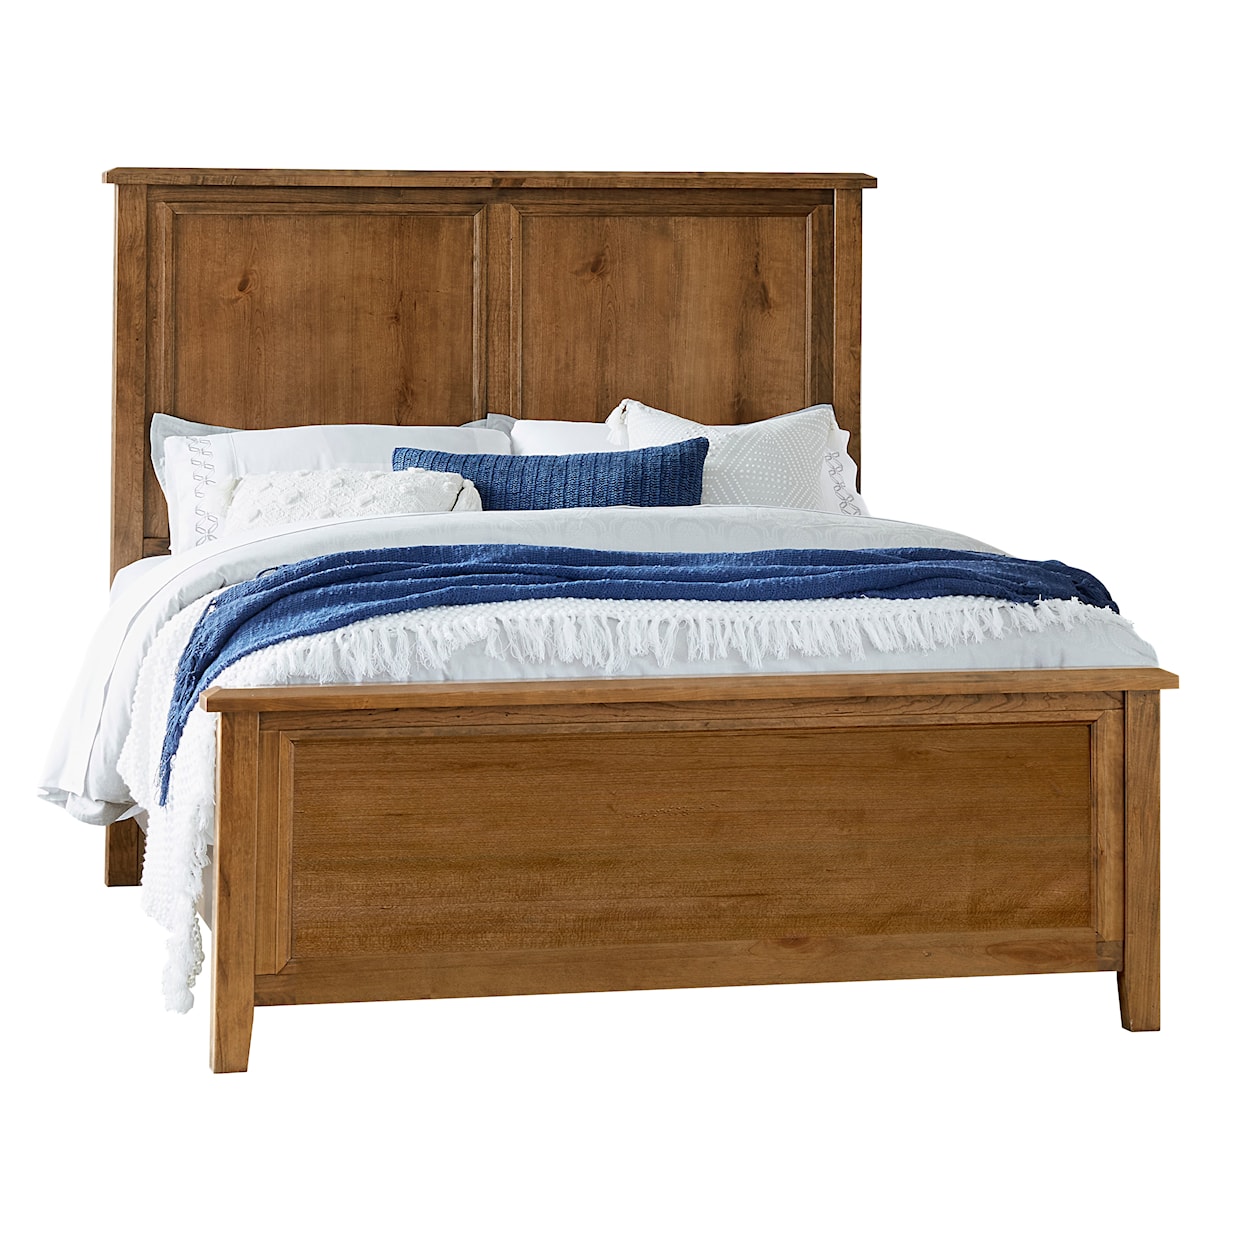 Vaughan-Bassett Lancaster County King Amish Panel Bed